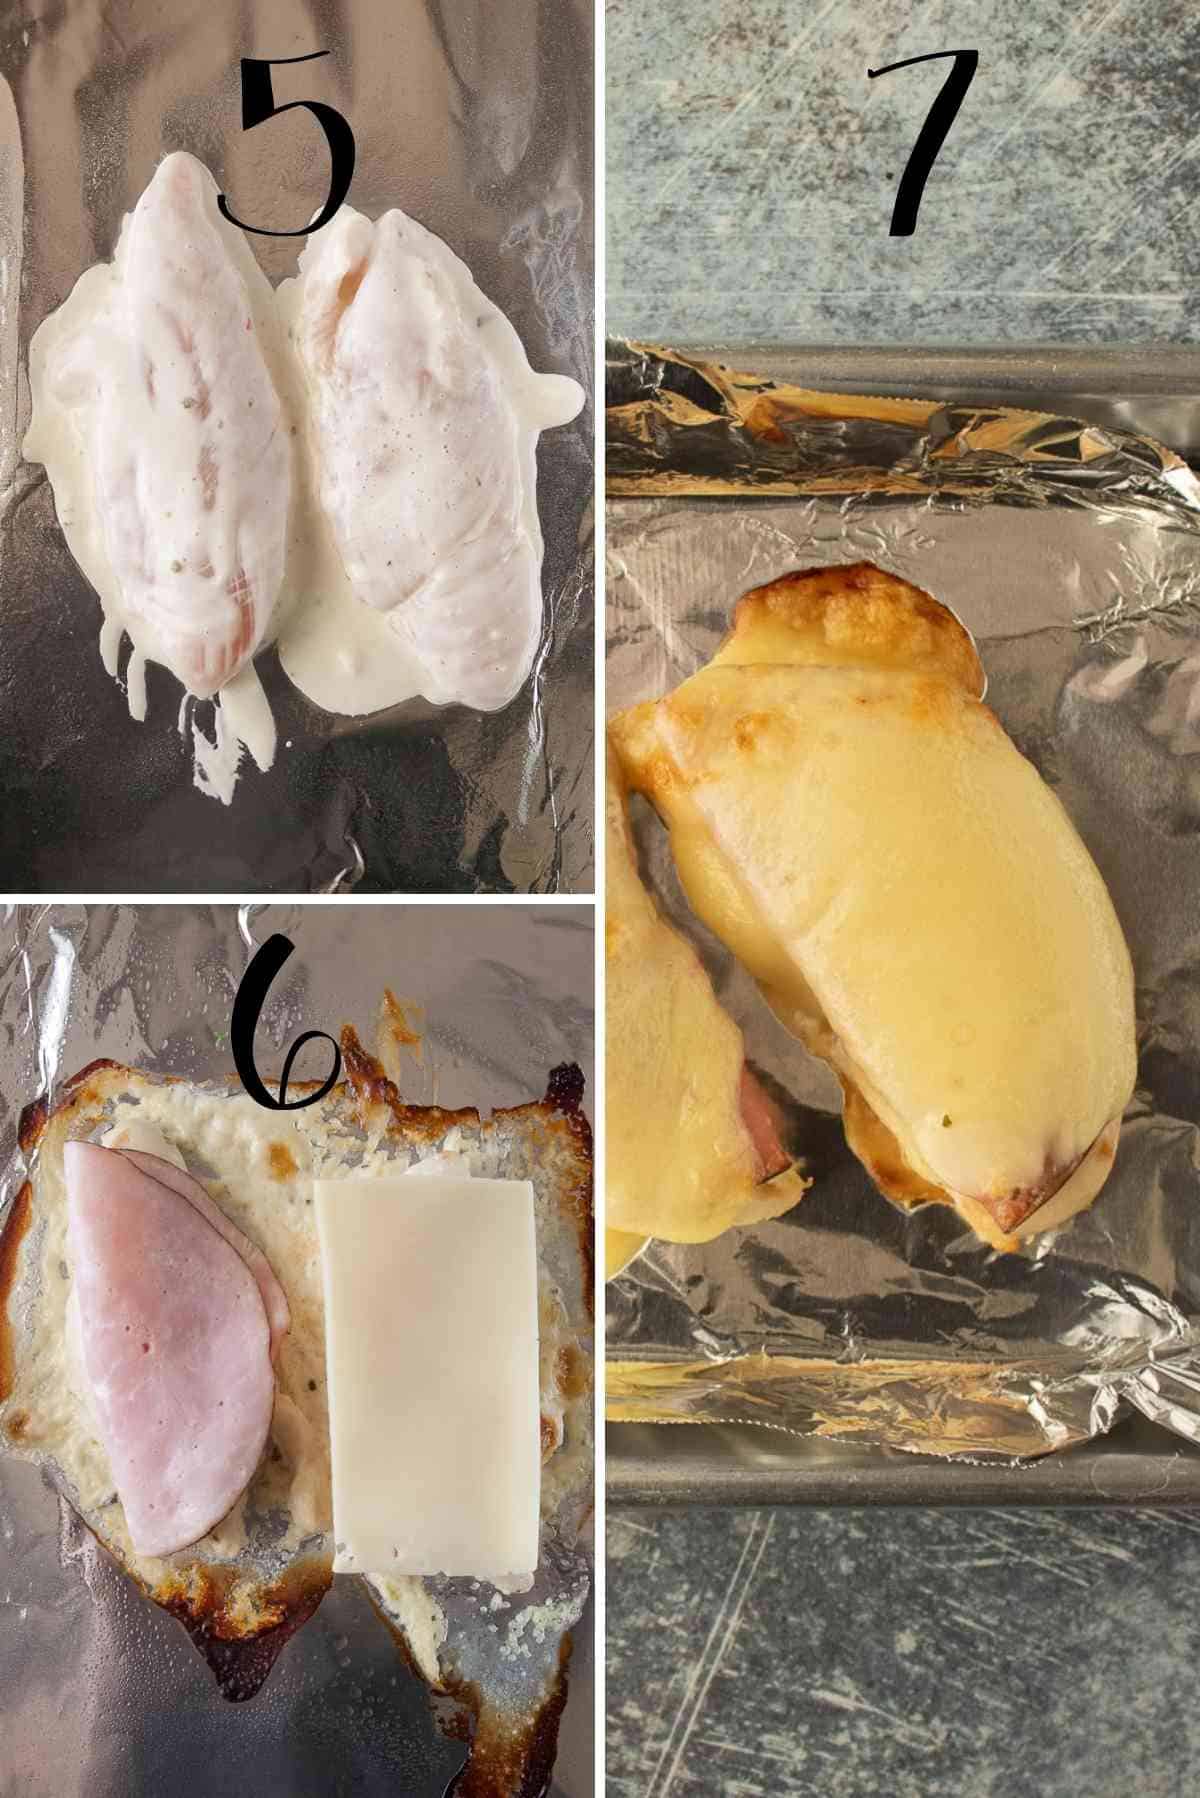 Marinated chicken laid out on baking sheet, baked, topped with ham and cheese, then broiled.